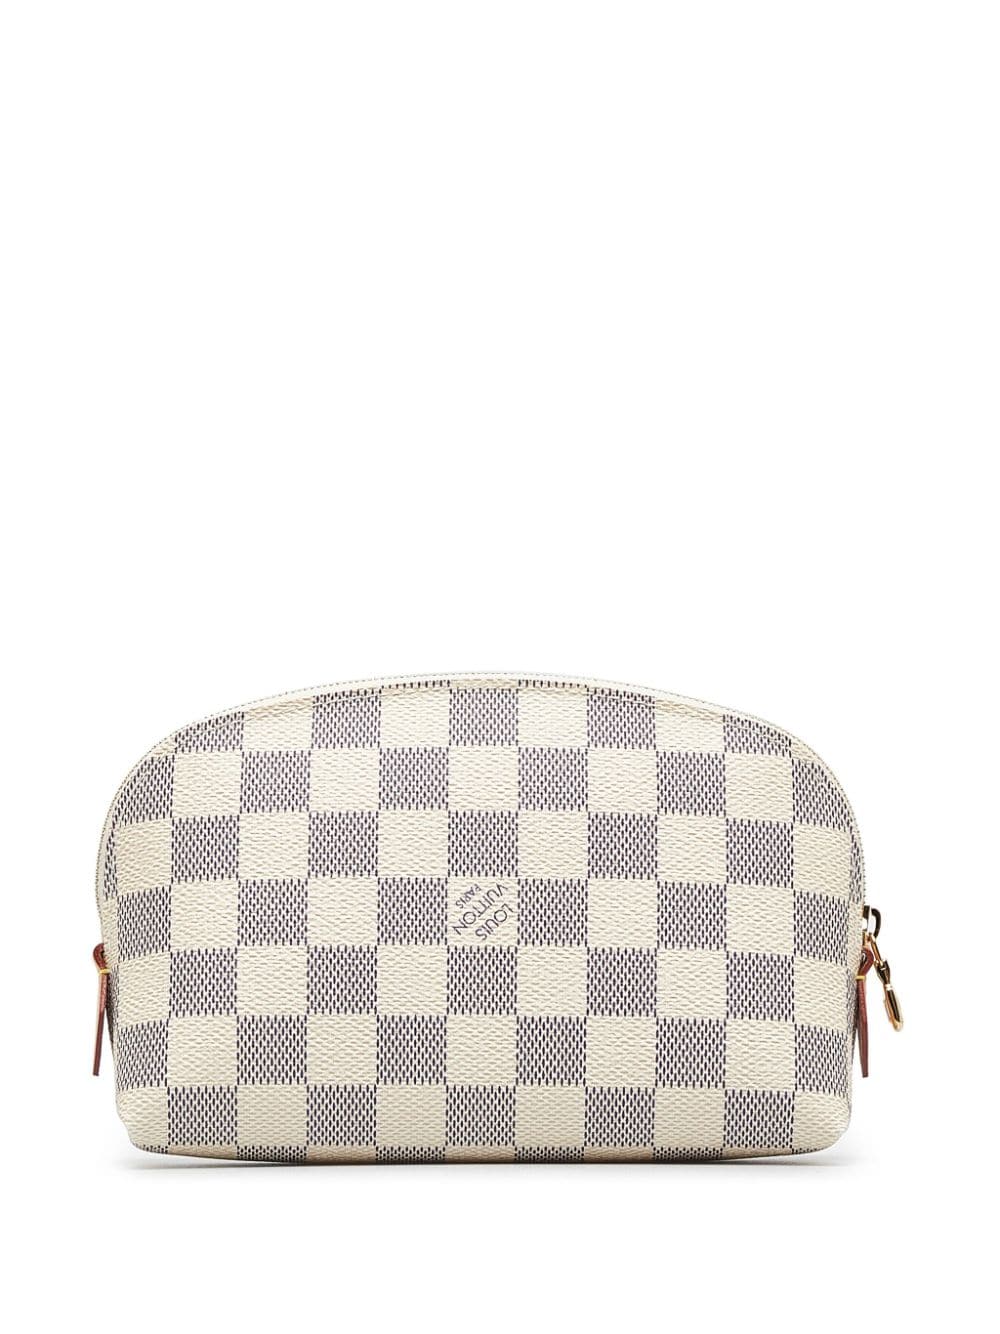 Louis Vuitton 2011 pre-owned Damier Azur cosmetic bag - Wit